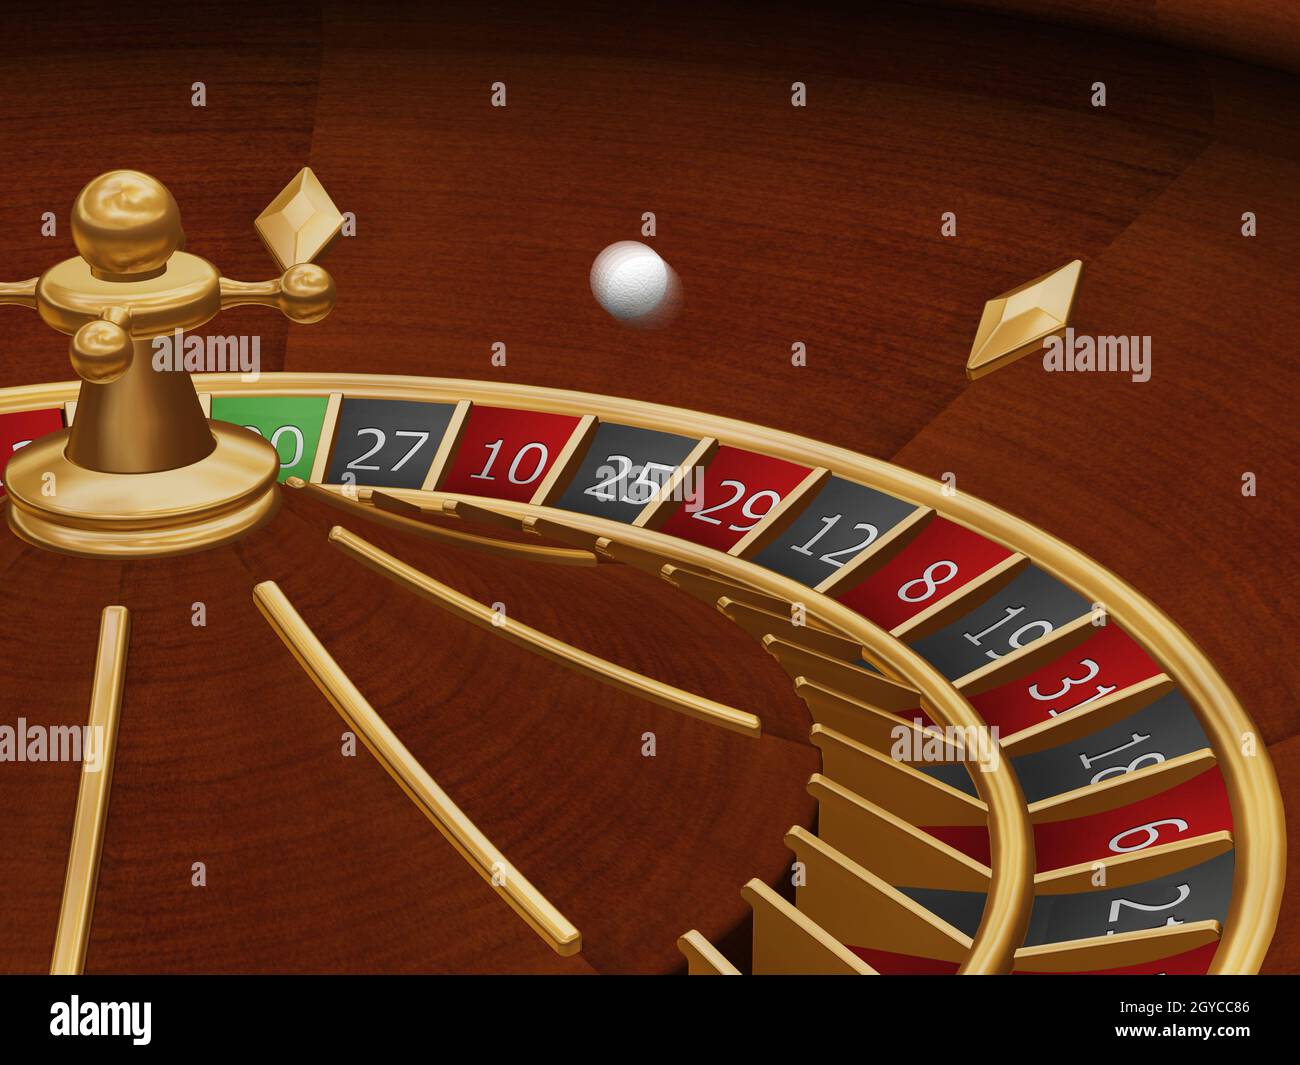 3D render of a roulette wheel with the ball in motion Stock Photo